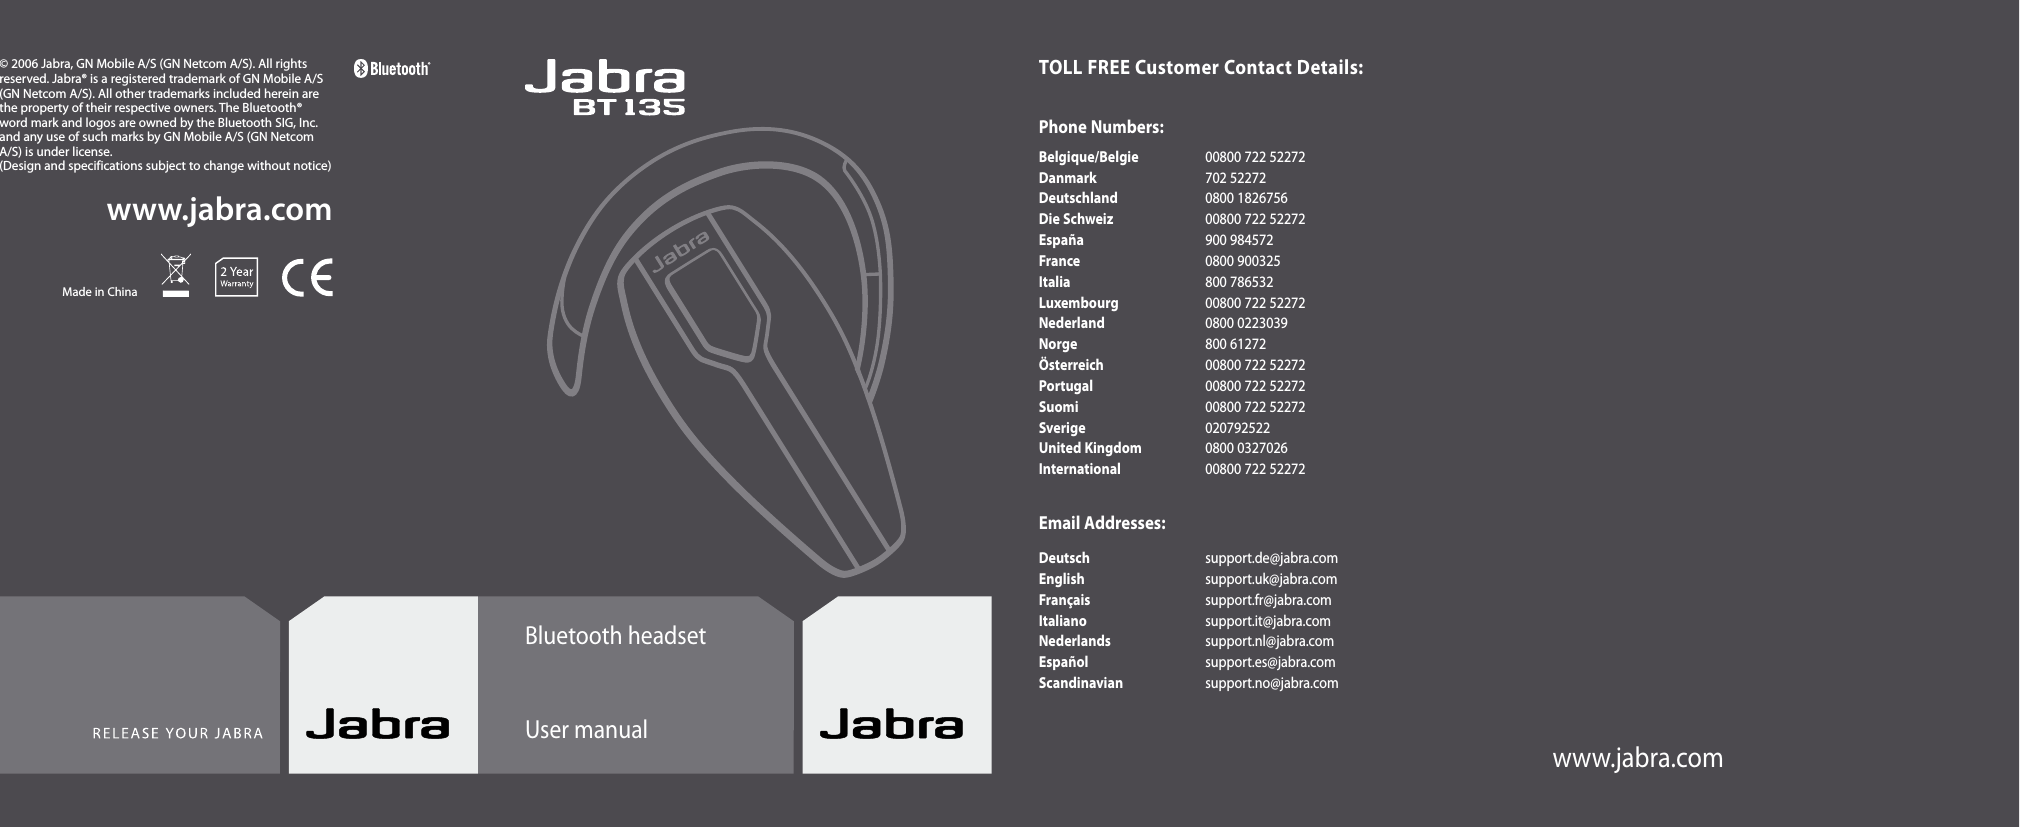 www.jabra.comwww.jabra.com© 2006 Jabra, GN Mobile A/S (GN Netcom A/S). All rights reserved. Jabra® is a registered trademark of GN Mobile A/S (GN Netcom A/S). All other trademarks included herein are the property of their respective owners. The Bluetooth® word mark and logos are owned by the Bluetooth SIG, Inc. and any use of such marks by GN Mobile A/S (GN Netcom A/S) is under license.(Design and specifications subject to change without notice)Made in ChinaBluetooth headsetUser manualTOLL FREE Customer Contact Details:Phone Numbers:Belgique/Belgie  00800 722 52272 Danmark  702 52272 Deutschland  0800 1826756 Die Schweiz  00800 722 52272 España  900 984572 France  0800 900325 Italia  800 786532 Luxembourg  00800 722 52272 Nederland  0800 0223039 Norge  800 61272 Österreich  00800 722 52272 Portugal  00800 722 52272 Suomi  00800 722 52272 Sverige  020792522 United Kingdom  0800 0327026 International  00800 722 52272Email Addresses:Deutsch  support.de@jabra.com English  support.uk@jabra.com Français  support.fr@jabra.com Italiano  support.it@jabra.com Nederlands  support.nl@jabra.com Español  support.es@jabra.com Scandinavian  support.no@jabra.comwww.jabra.com